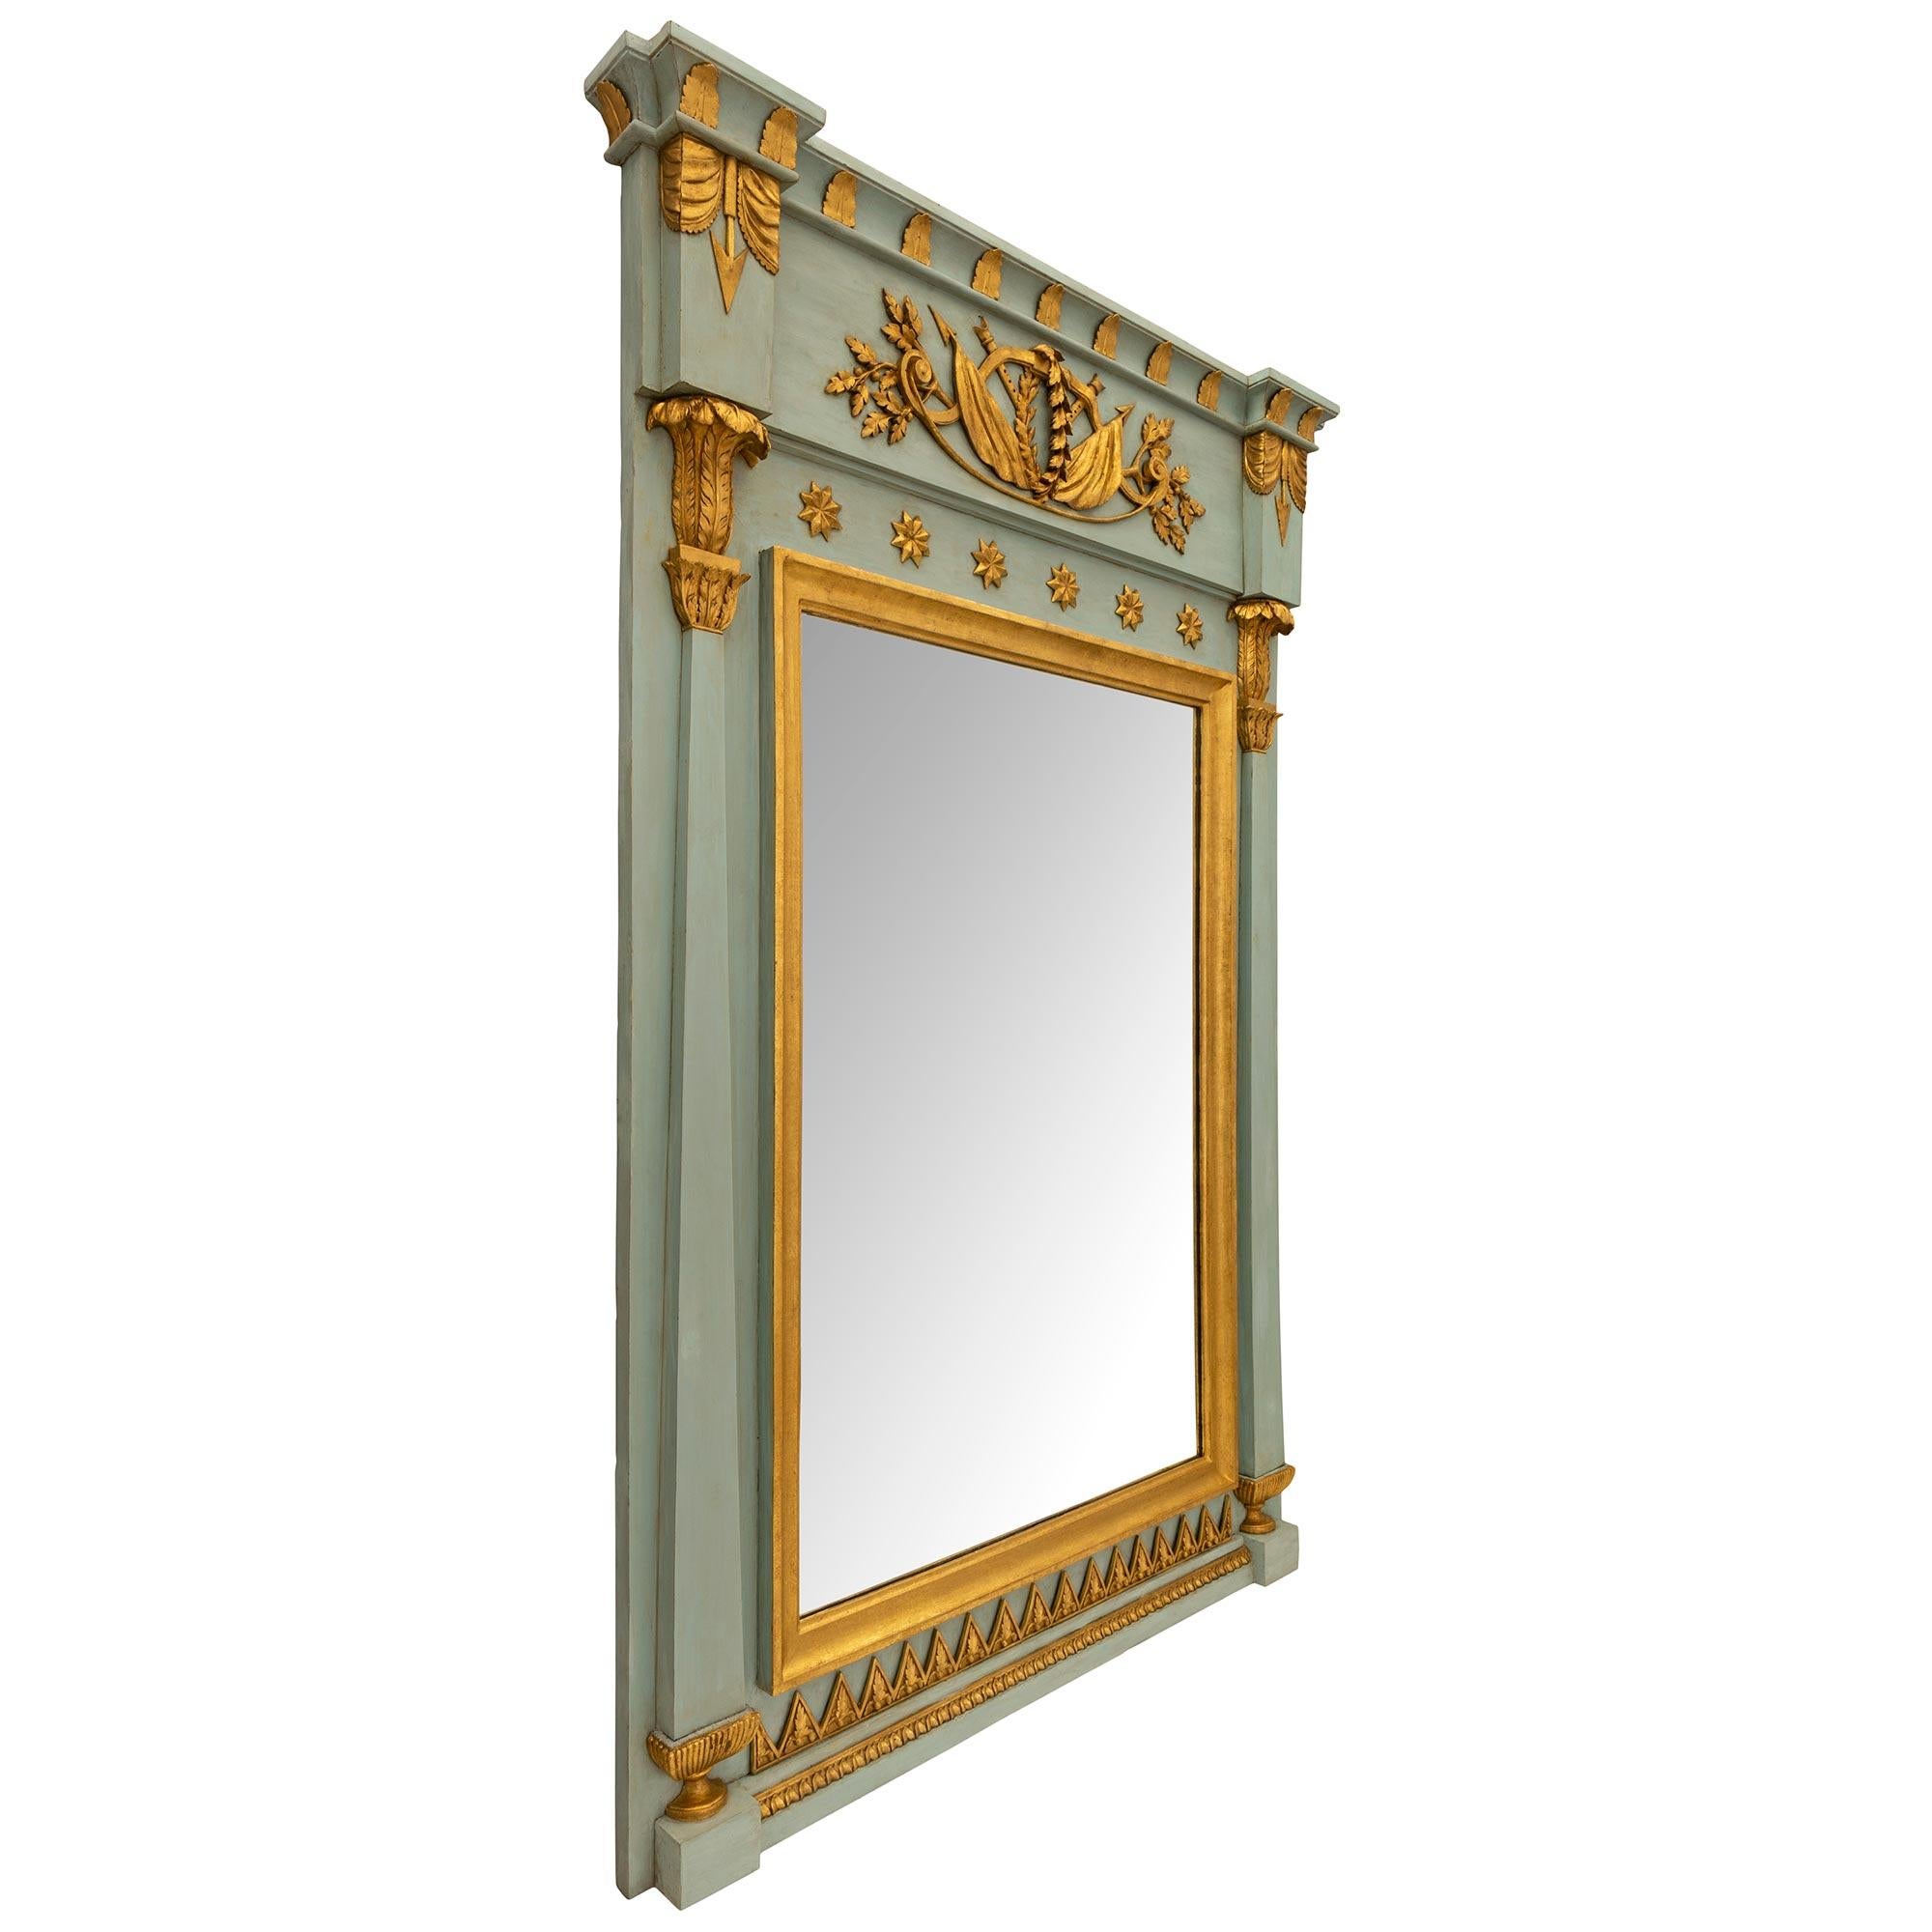 A striking and extremely decorative French 19th century 1st Empire period patinated and giltwood mirror circa 1805. The mirror displays a central mirror plate framed within an elegant mottled giltwood border and flanked by striking tapered columns